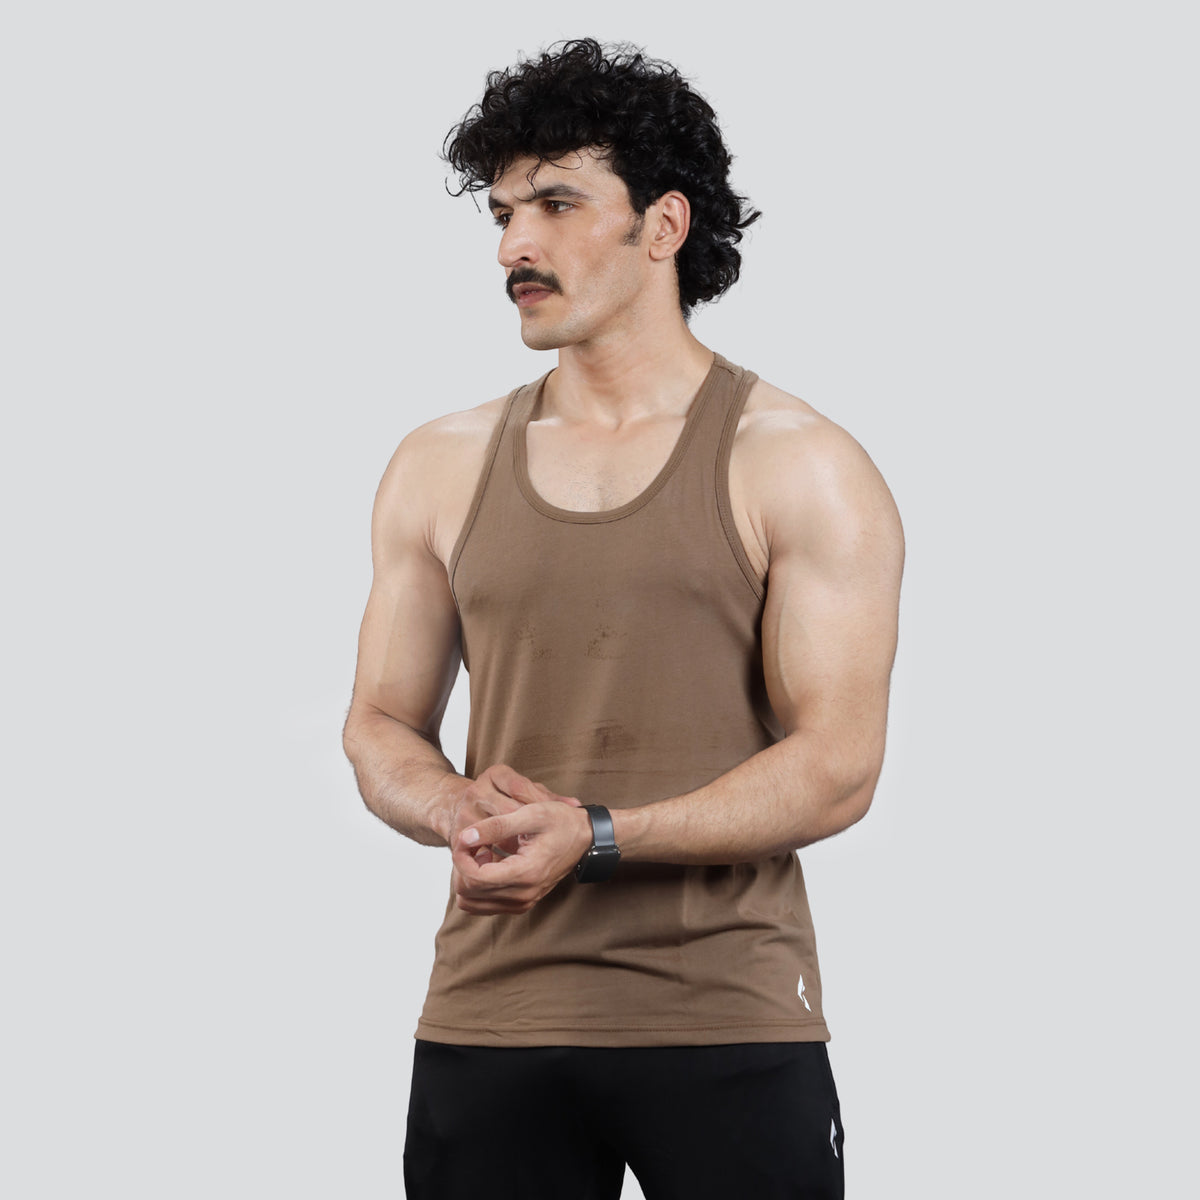 Men's Athleisure Tank Tops Sleeveless T-Shirts For Workout